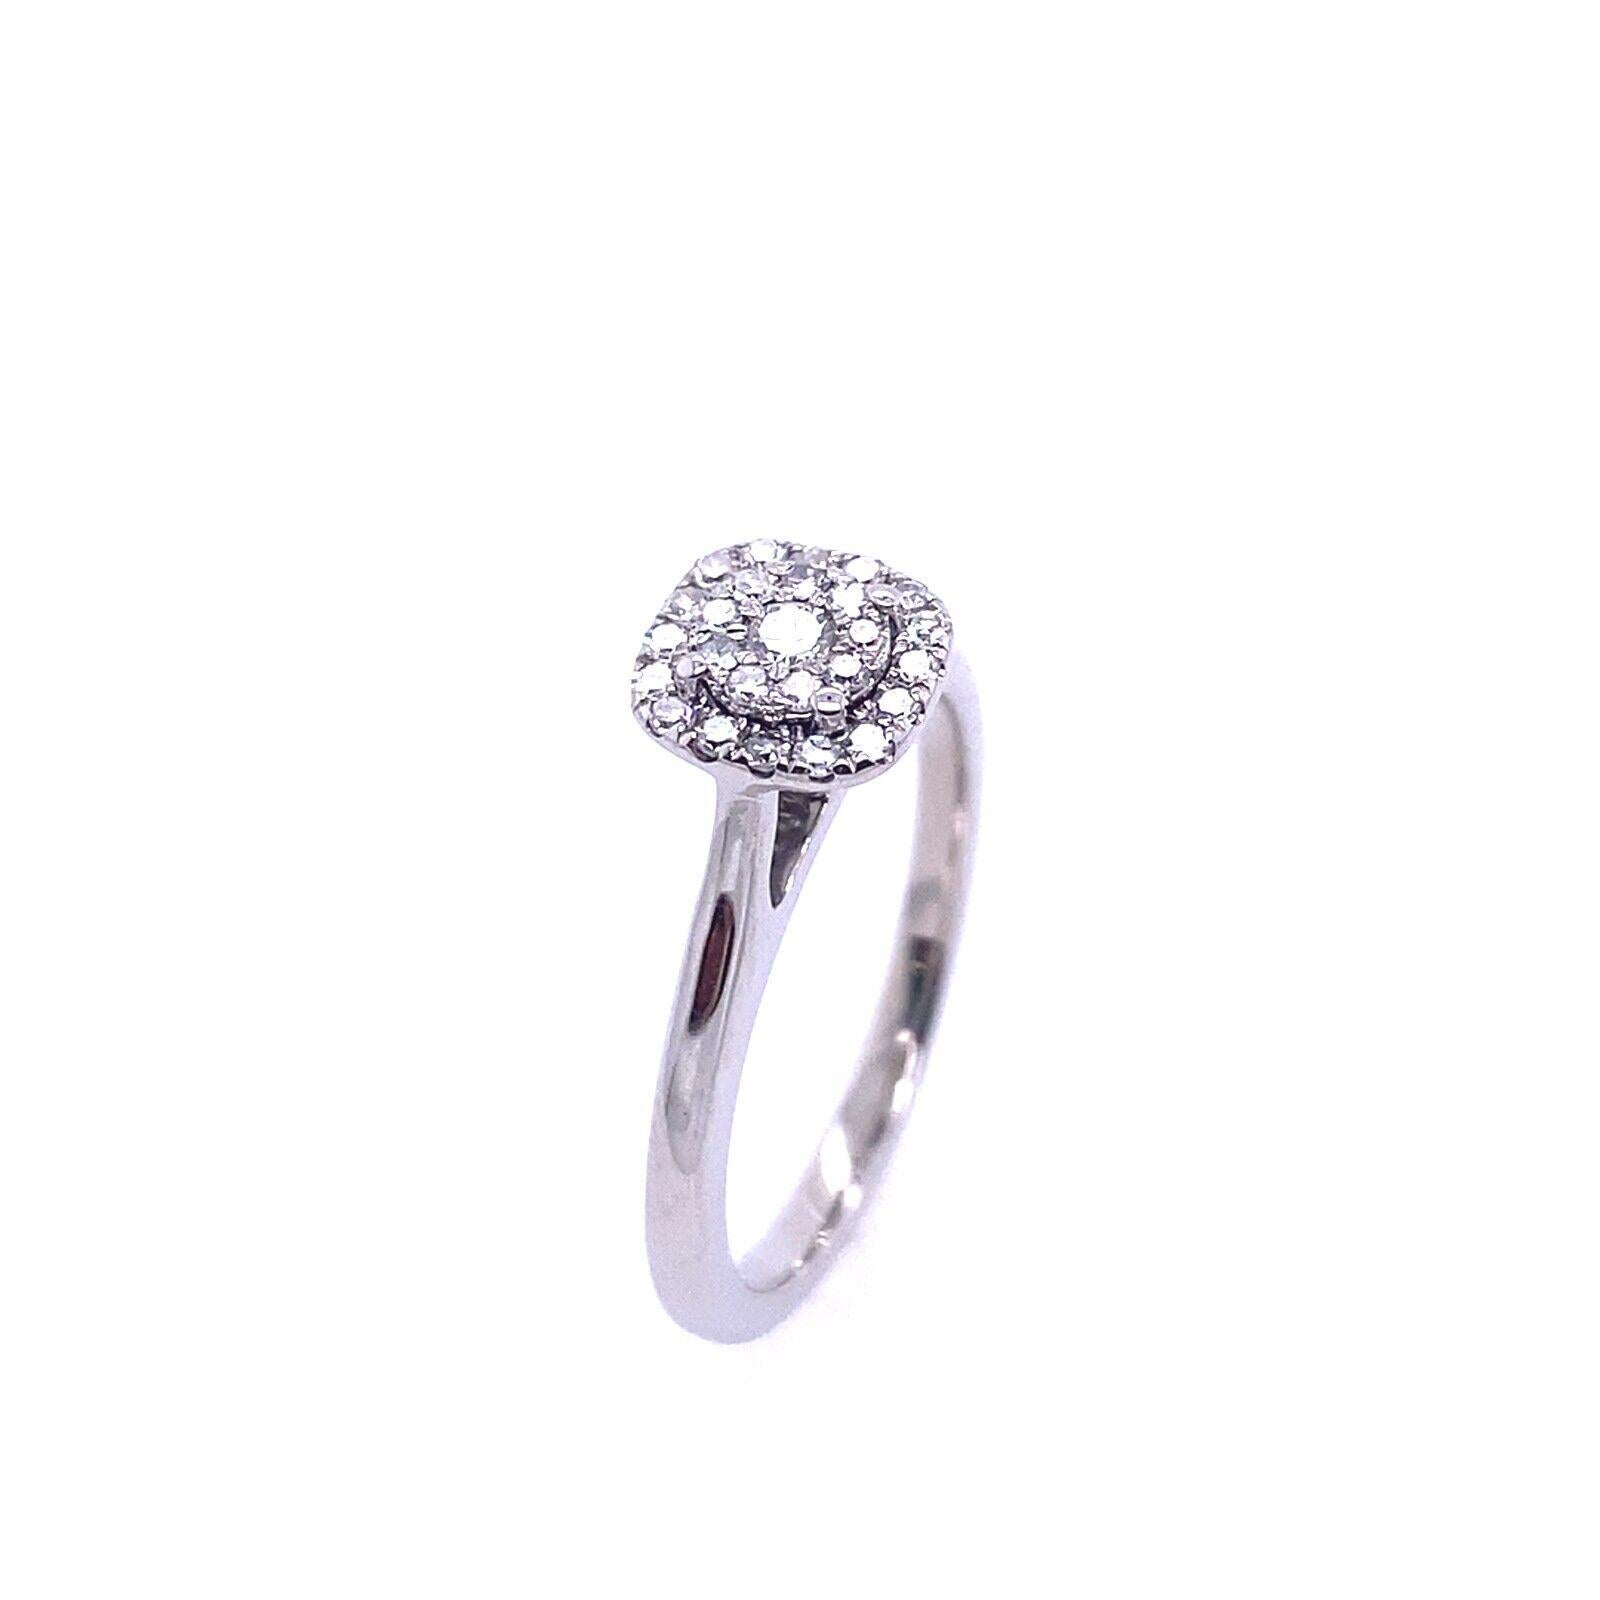 This beautiful 18ct white gold diamond ring features a cluster of round brilliant cut diamonds set into a cushion shaped frame, in total the ring features 0.50ct of diamonds.

Additional Information: 
Total Diamond Weight: 0.25ct
Diamond Colour: